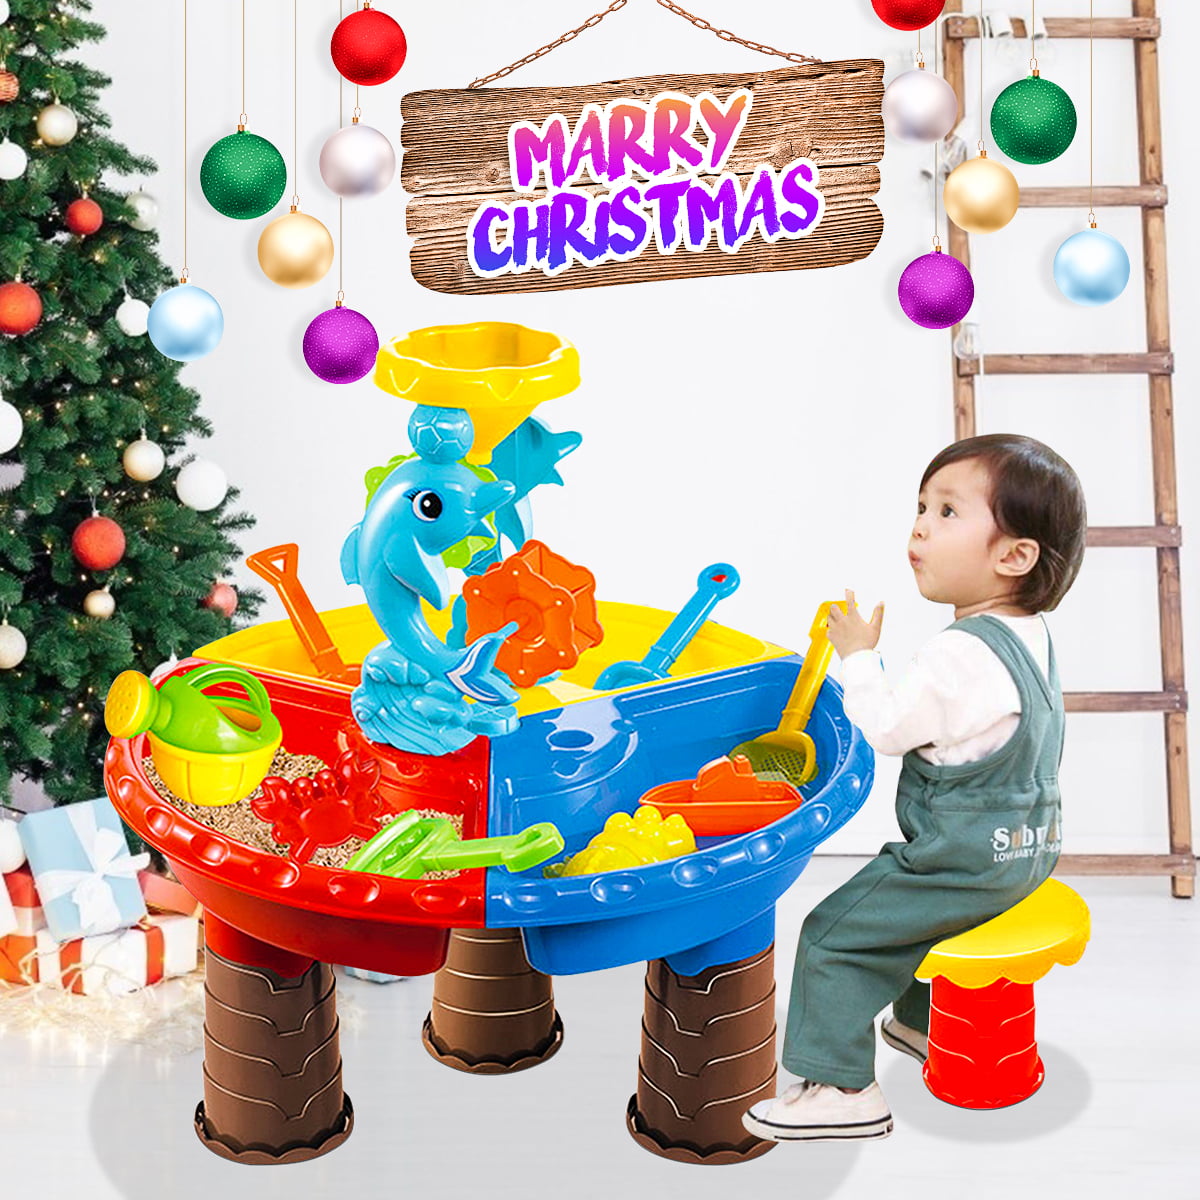 22Pcs/set Sand and Water Table Sandpit Beach Kids Children Play Toy Set Round Hourglass Sea Dolphin Toys Indoor & Outdoor, Great Christmas Gifts